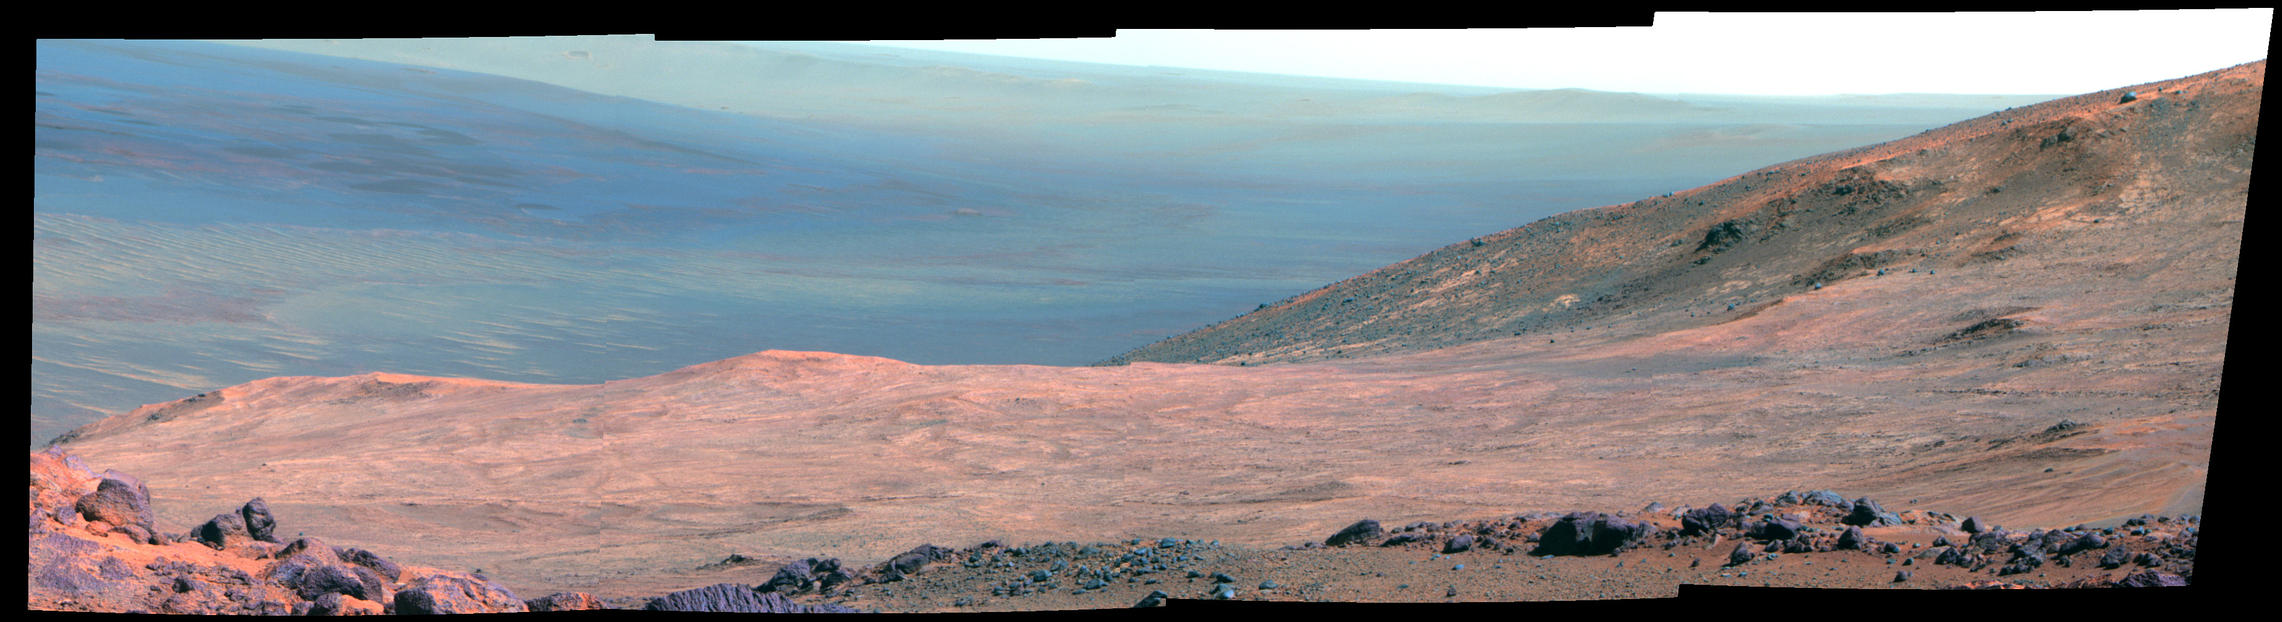 This view from NASA's Opportunity Mars rover shows part of "Marathon Valley" as seen from an overlook north of the valley. It was taken by the rover's Pancam on March 13, 2015. This version is presented in false color to make differences in surface materials more easily visible.